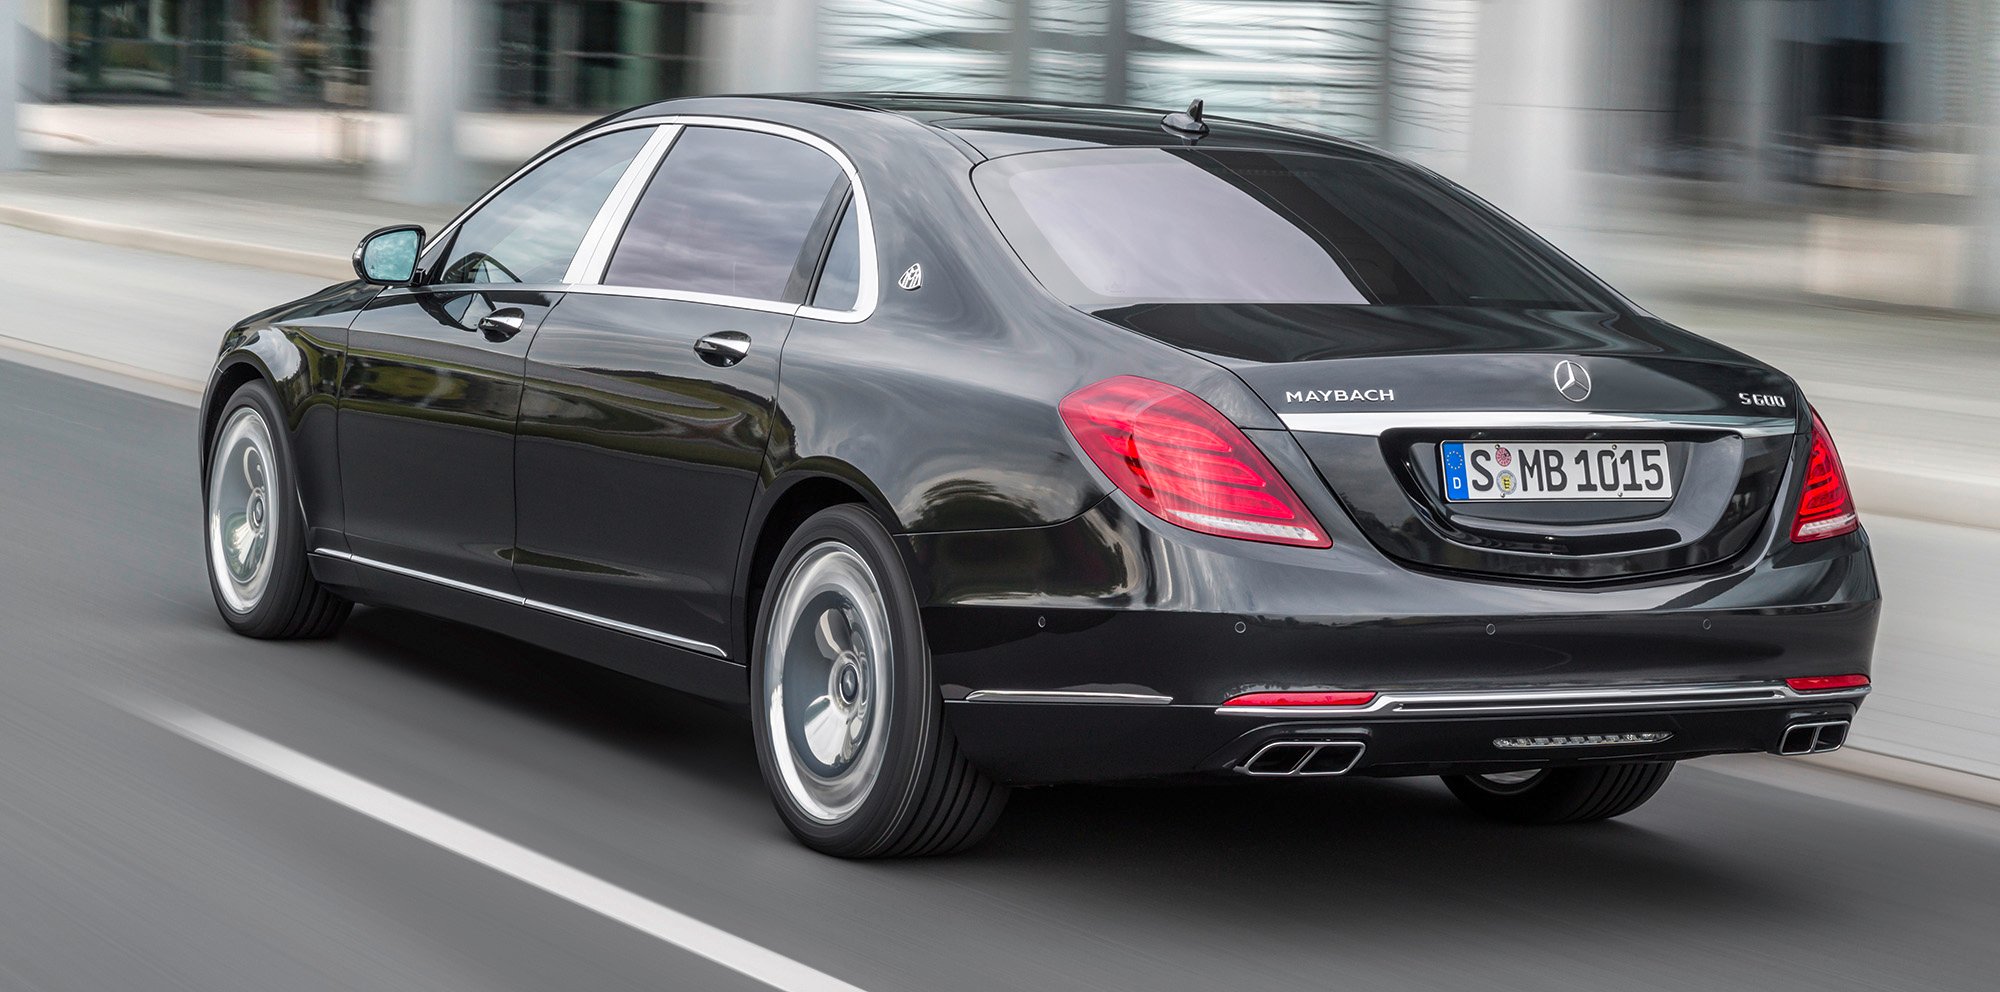 Mercedes-Maybach S-Class unveiled in LA: Stretched sedan due in